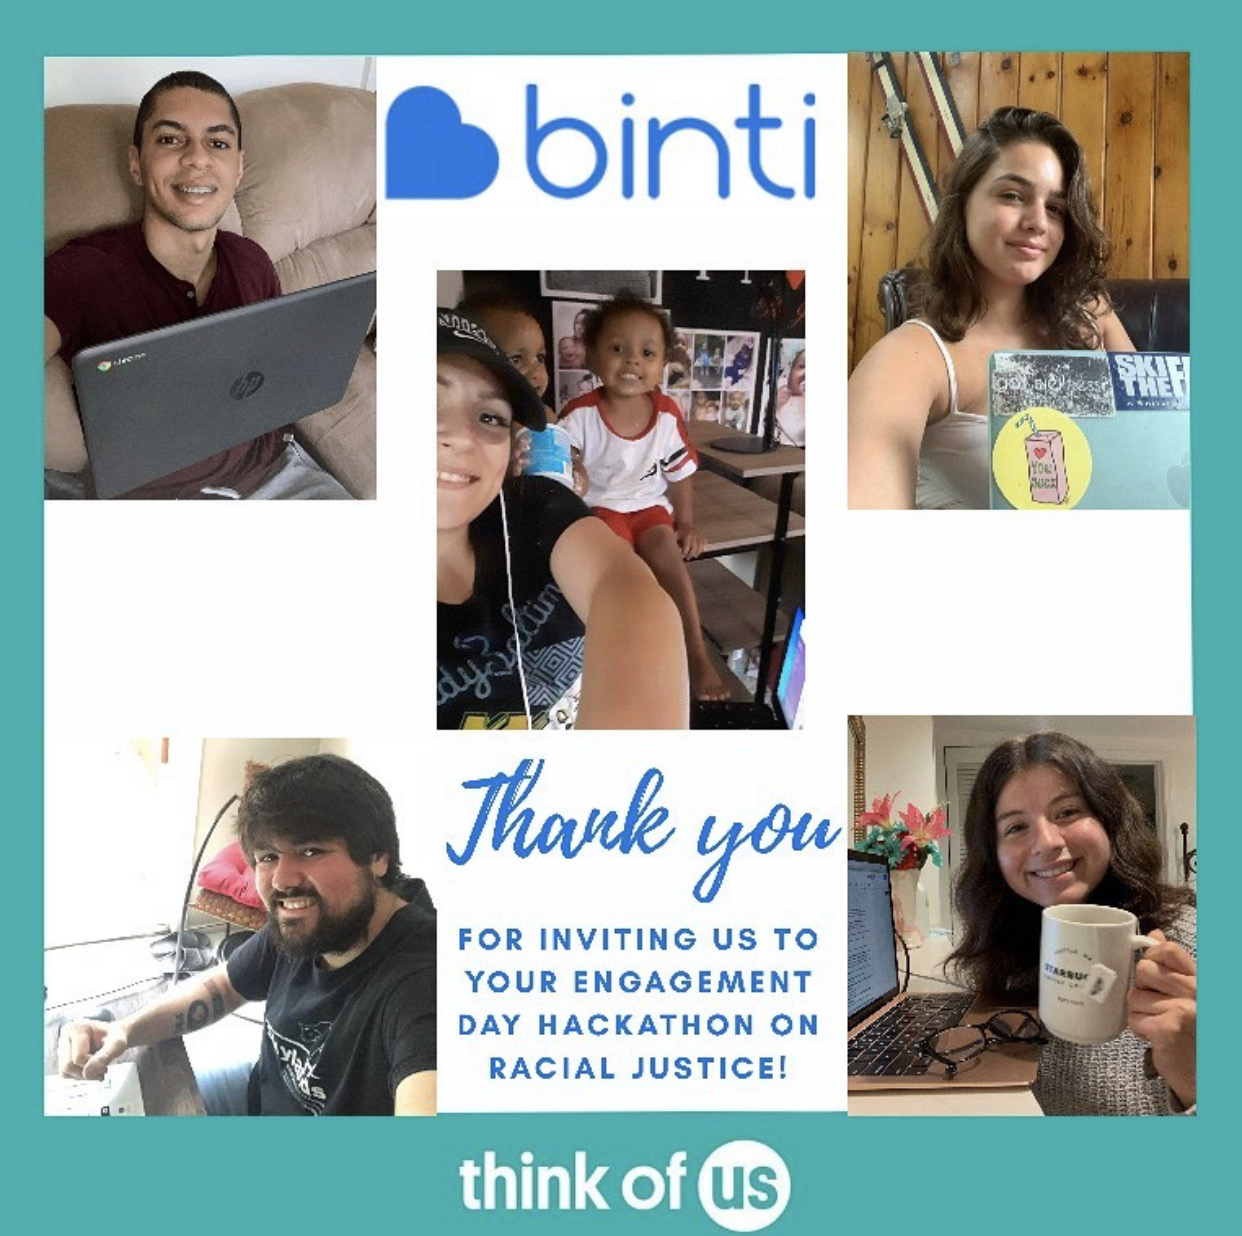 A thank you image featuring 5 selfies of young people at their work stations for the day, with the words "Thank you for inviting us to your engagement day hackathon on racial justice"